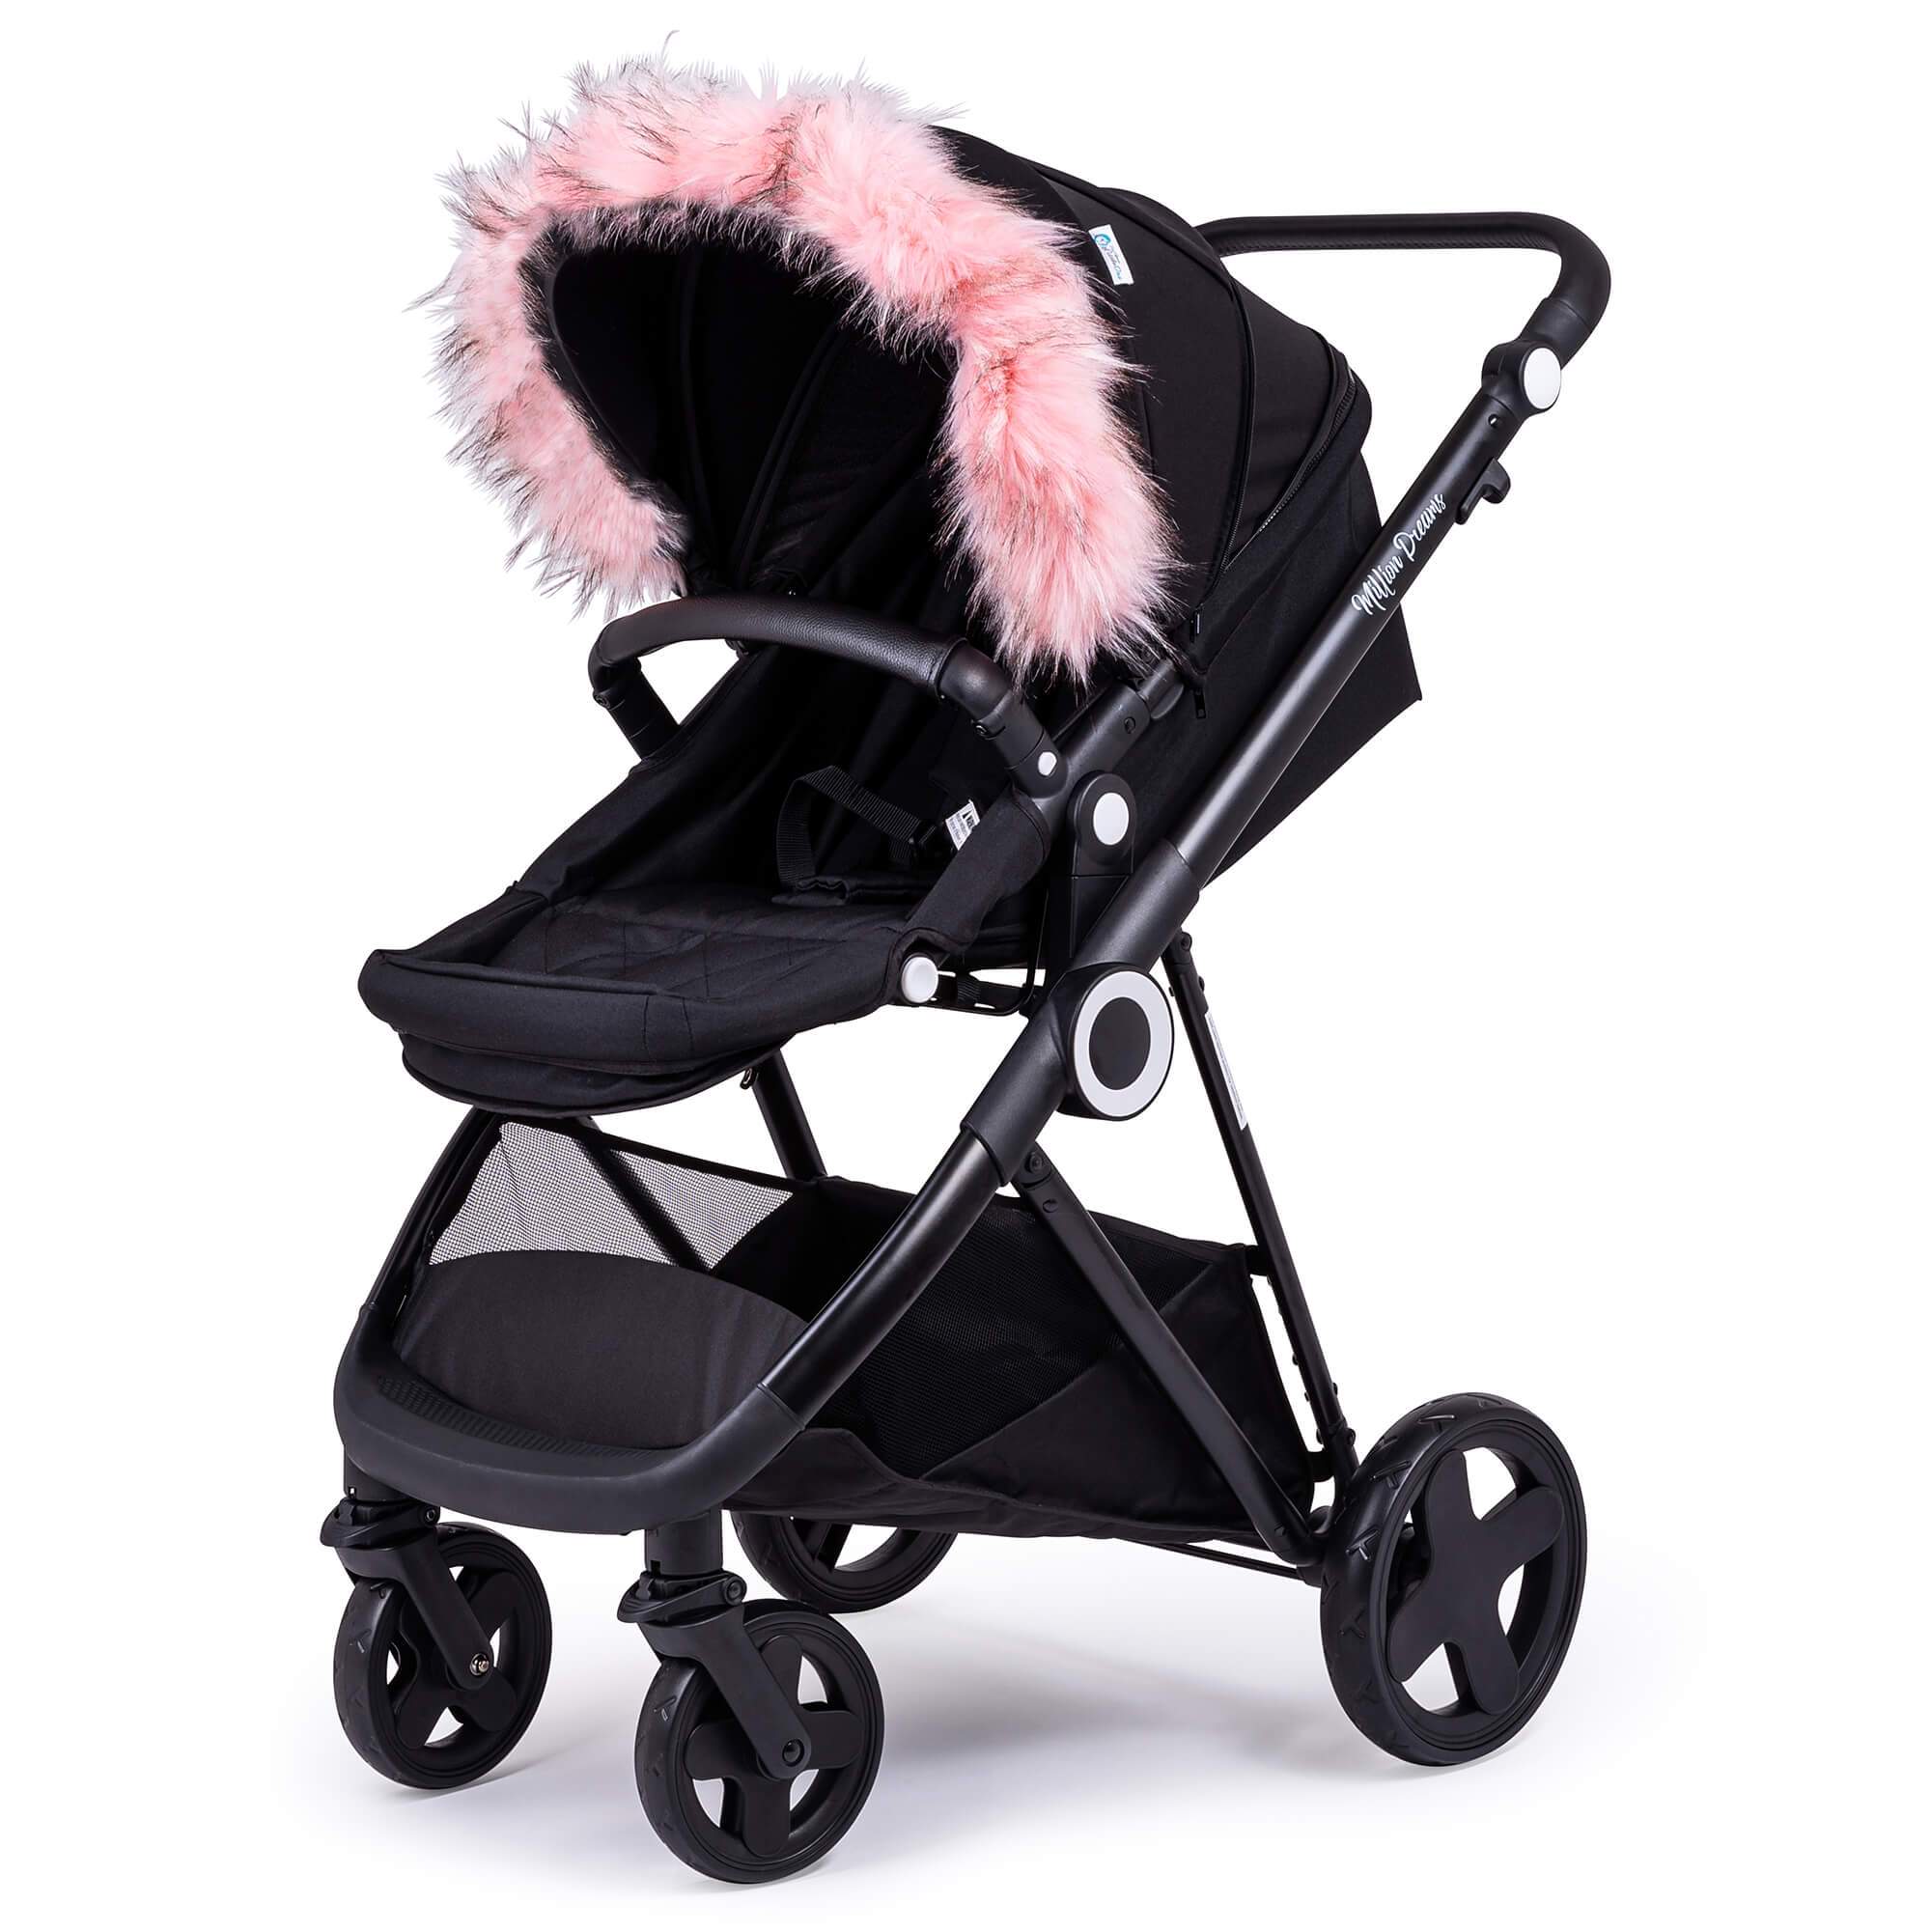 Pram Fur Hood Trim Attachment for Pushchair Compatible with Valco - Light Pink / Fits All Models | For Your Little One